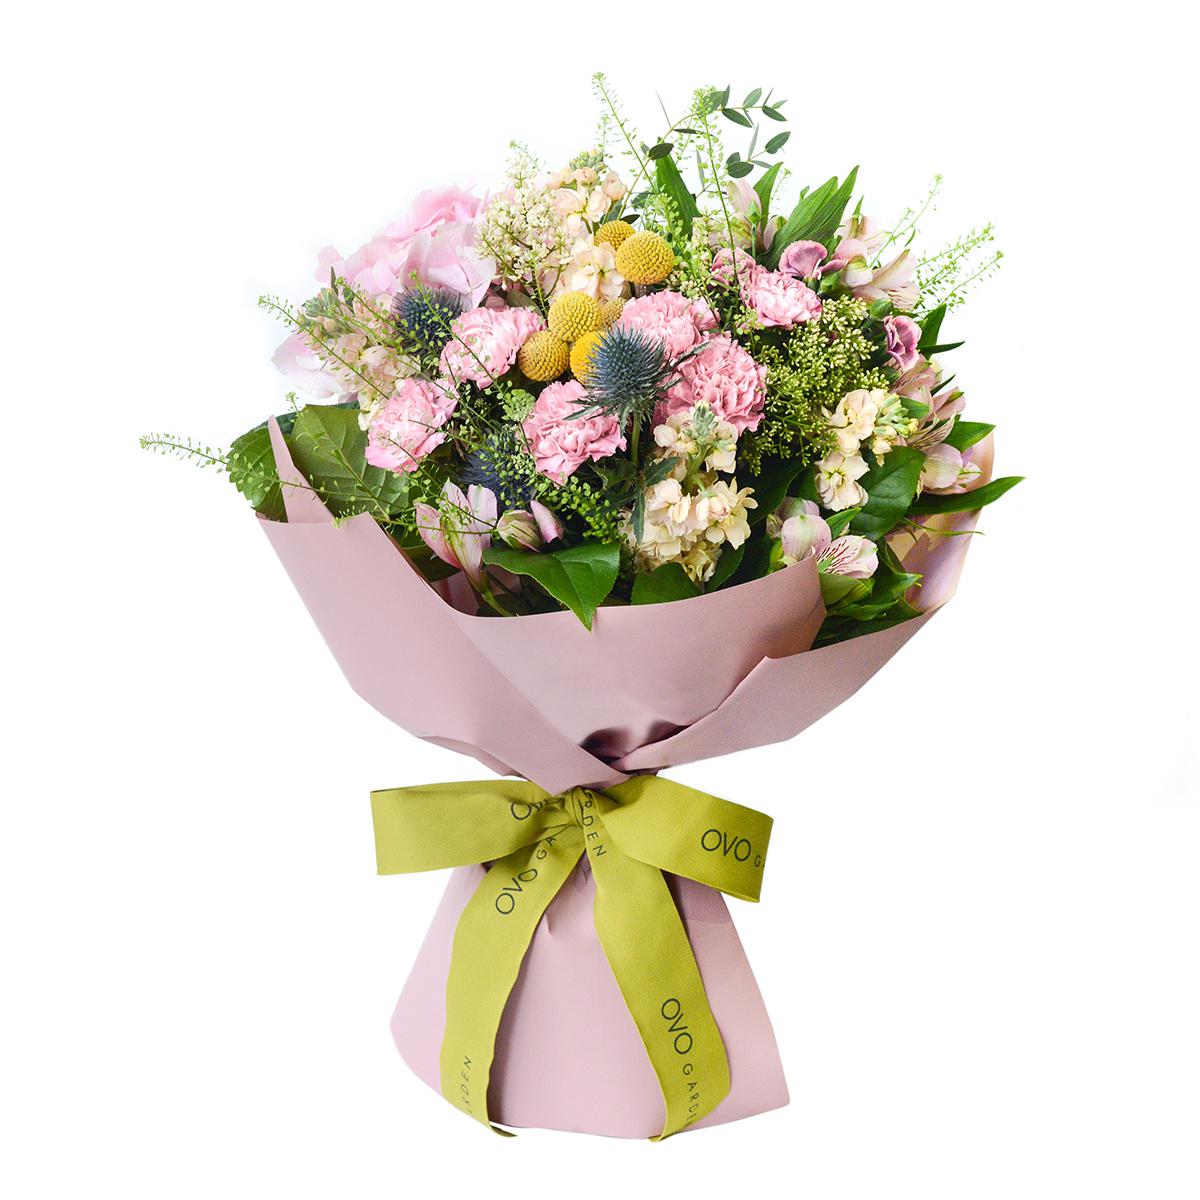 The "Warmest Wishes" bouquet of pink hydrangeas and carnations, HK$980 at OVO Garden